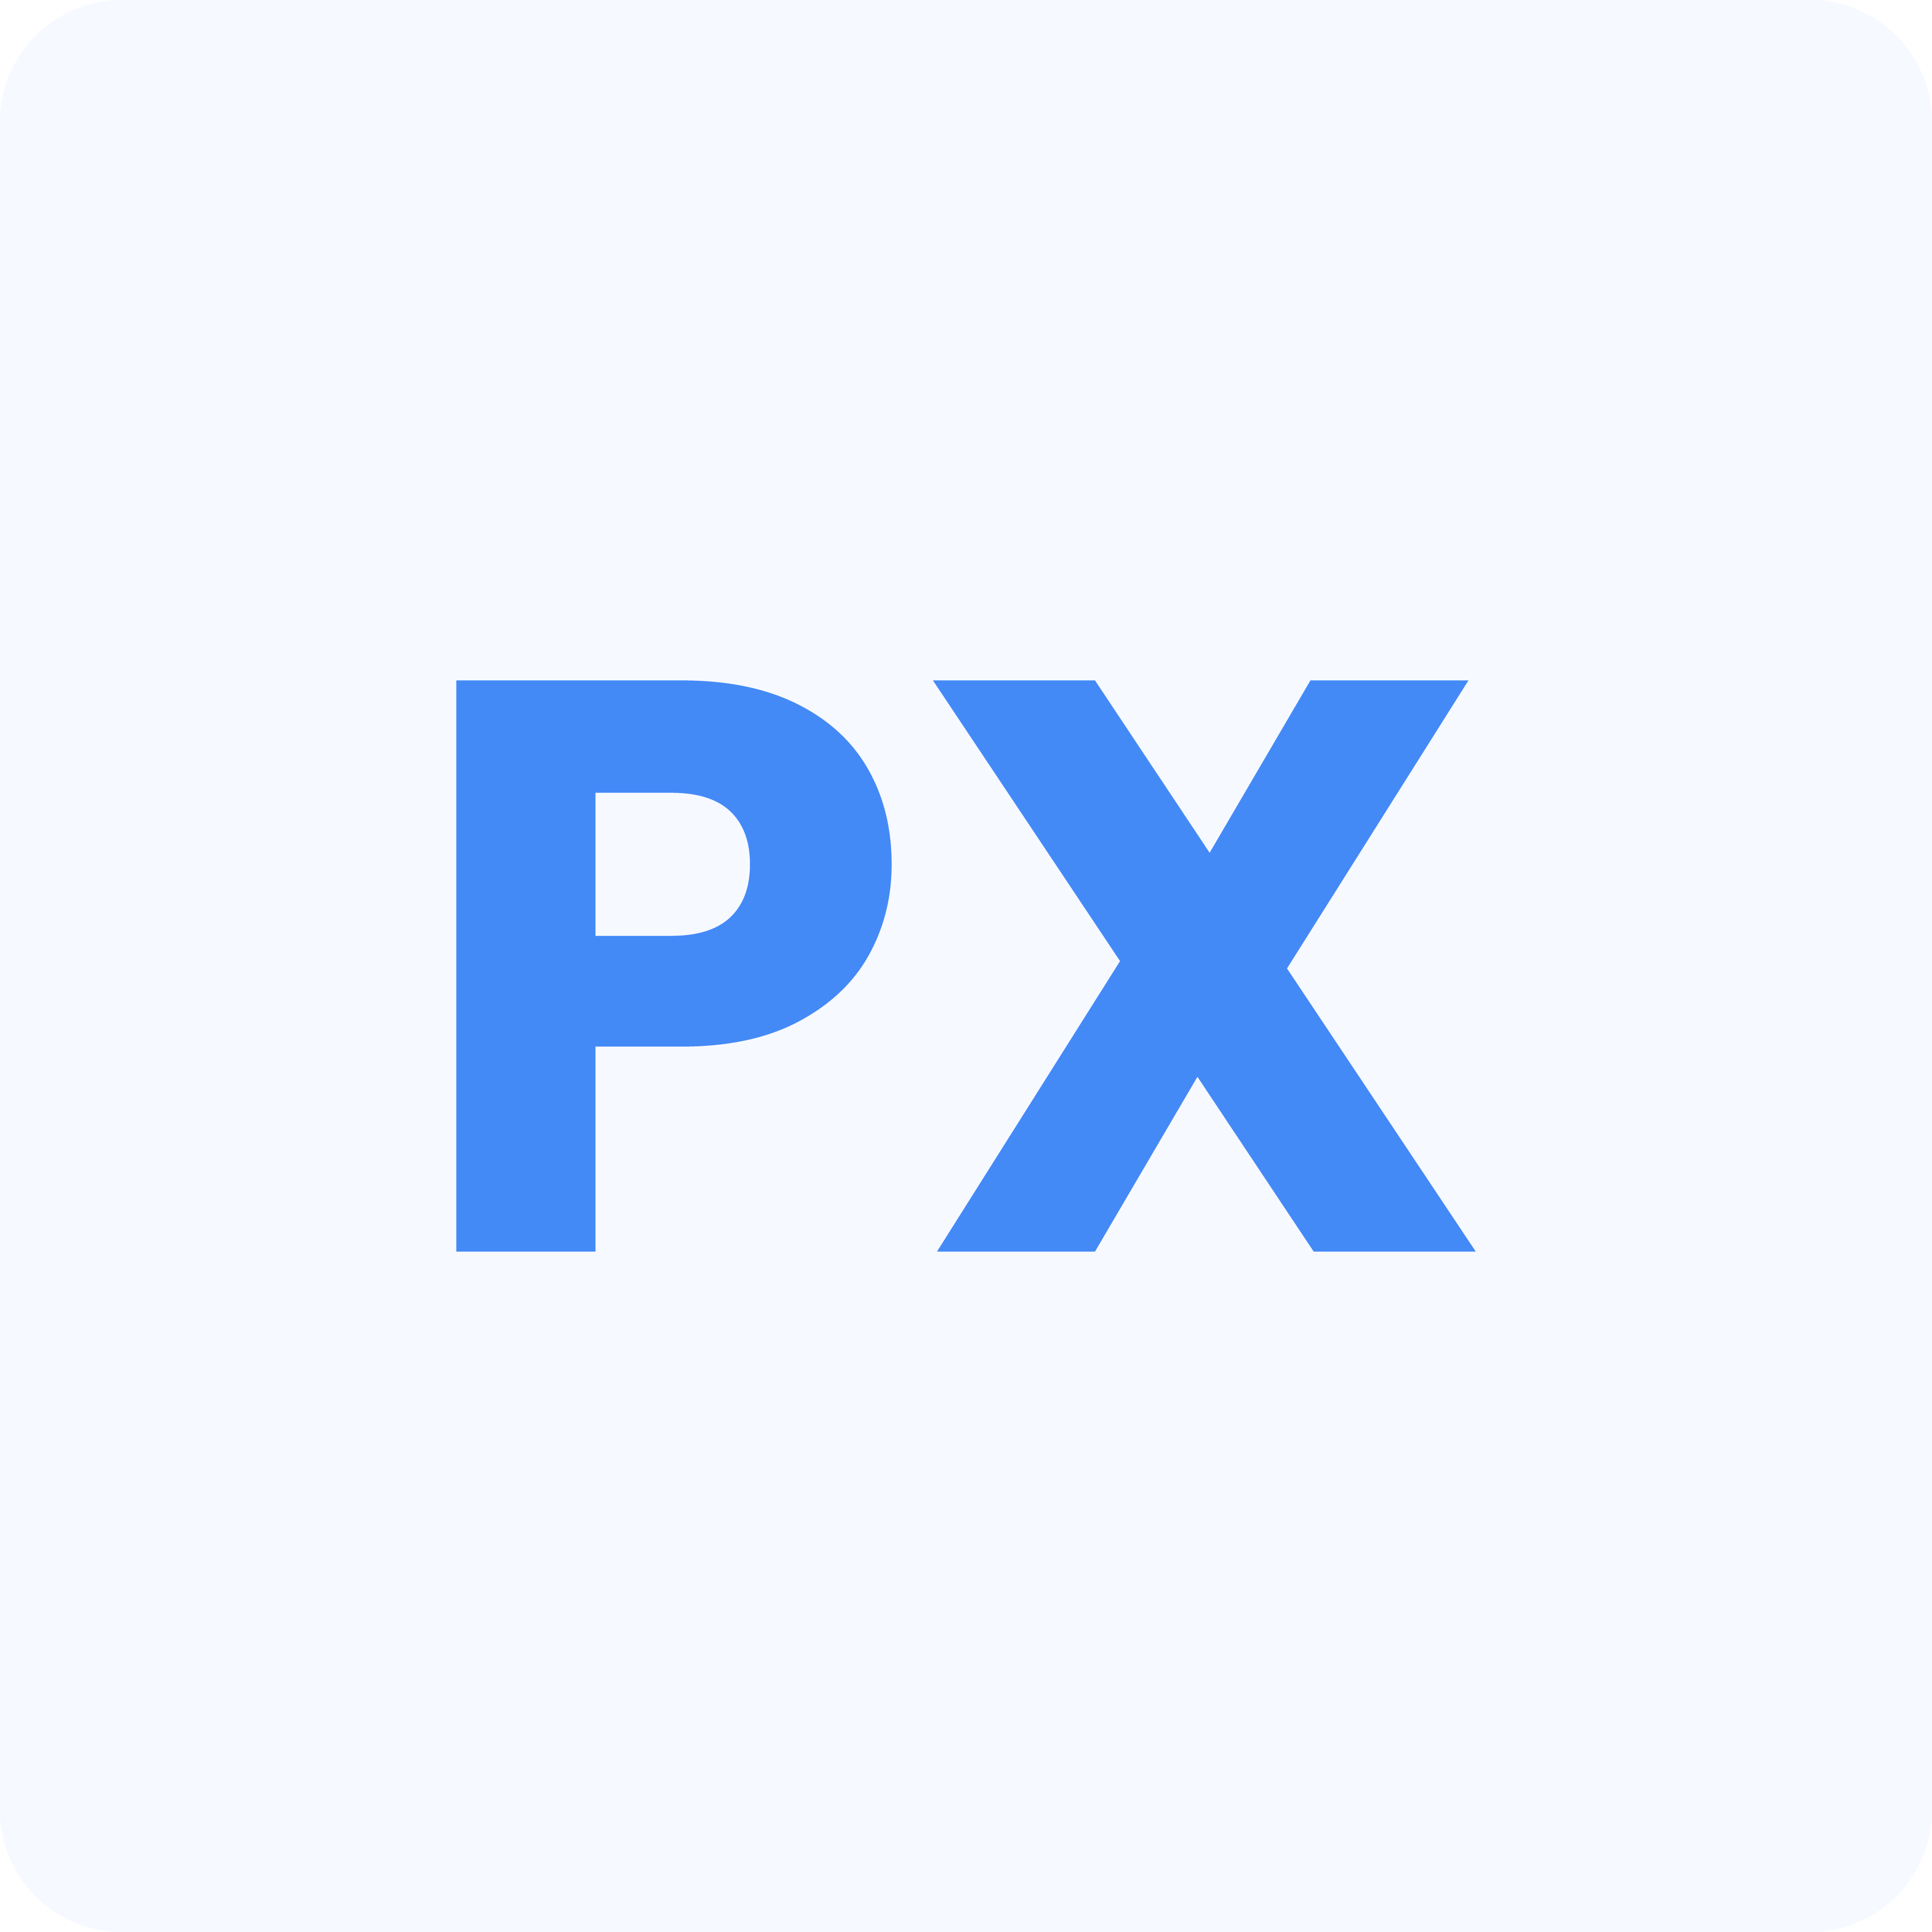 PX - Product eXperience